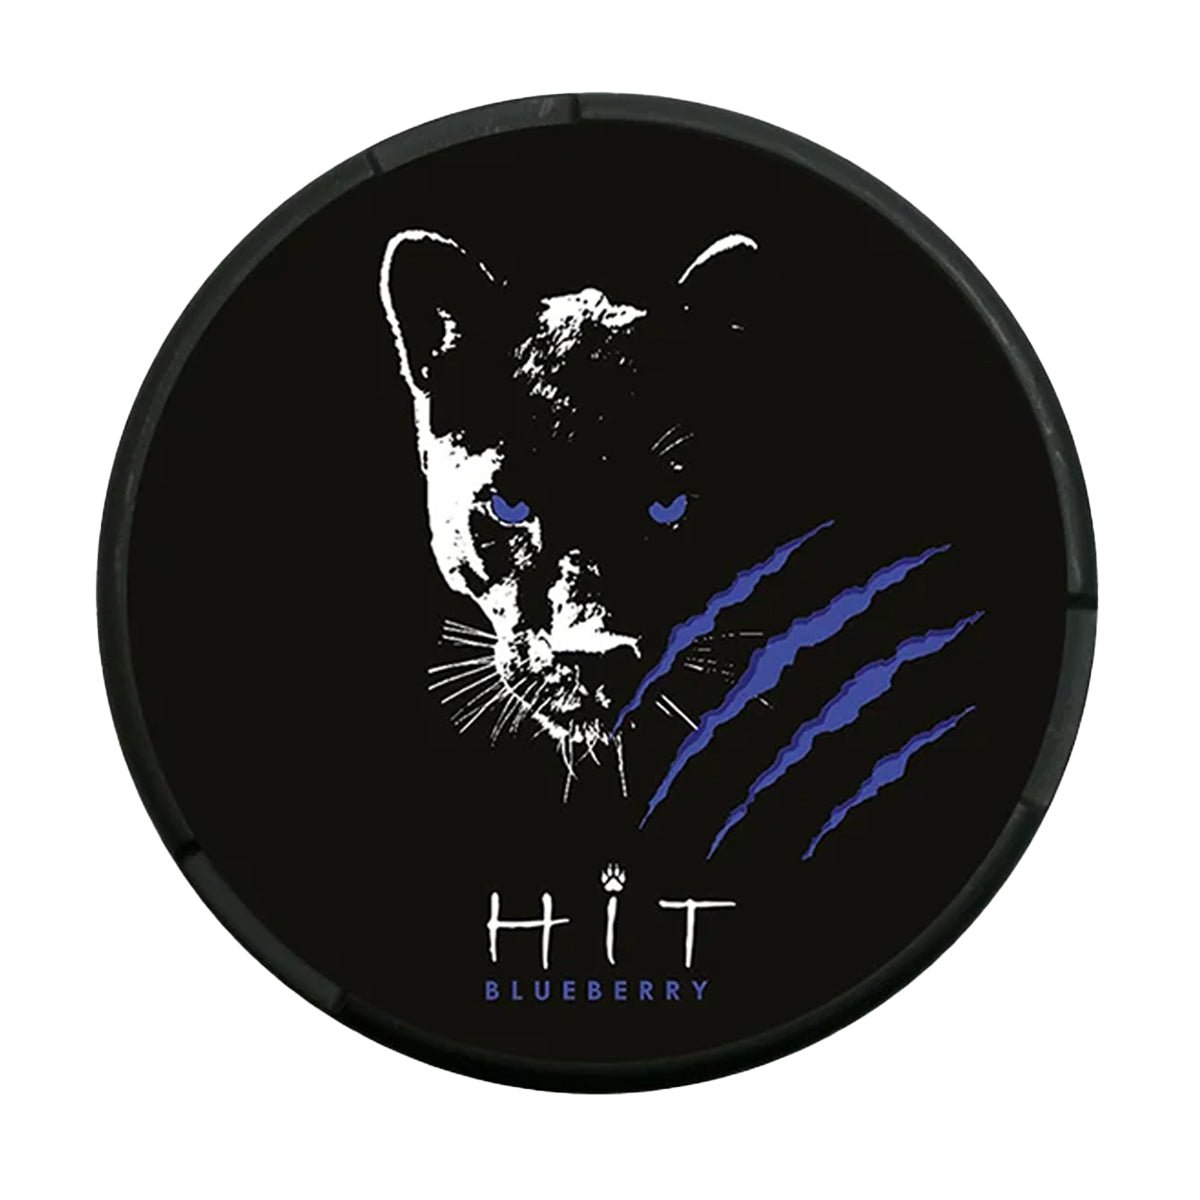 Blueberry Nicotine Pouches By Hit - Prime Vapes UK